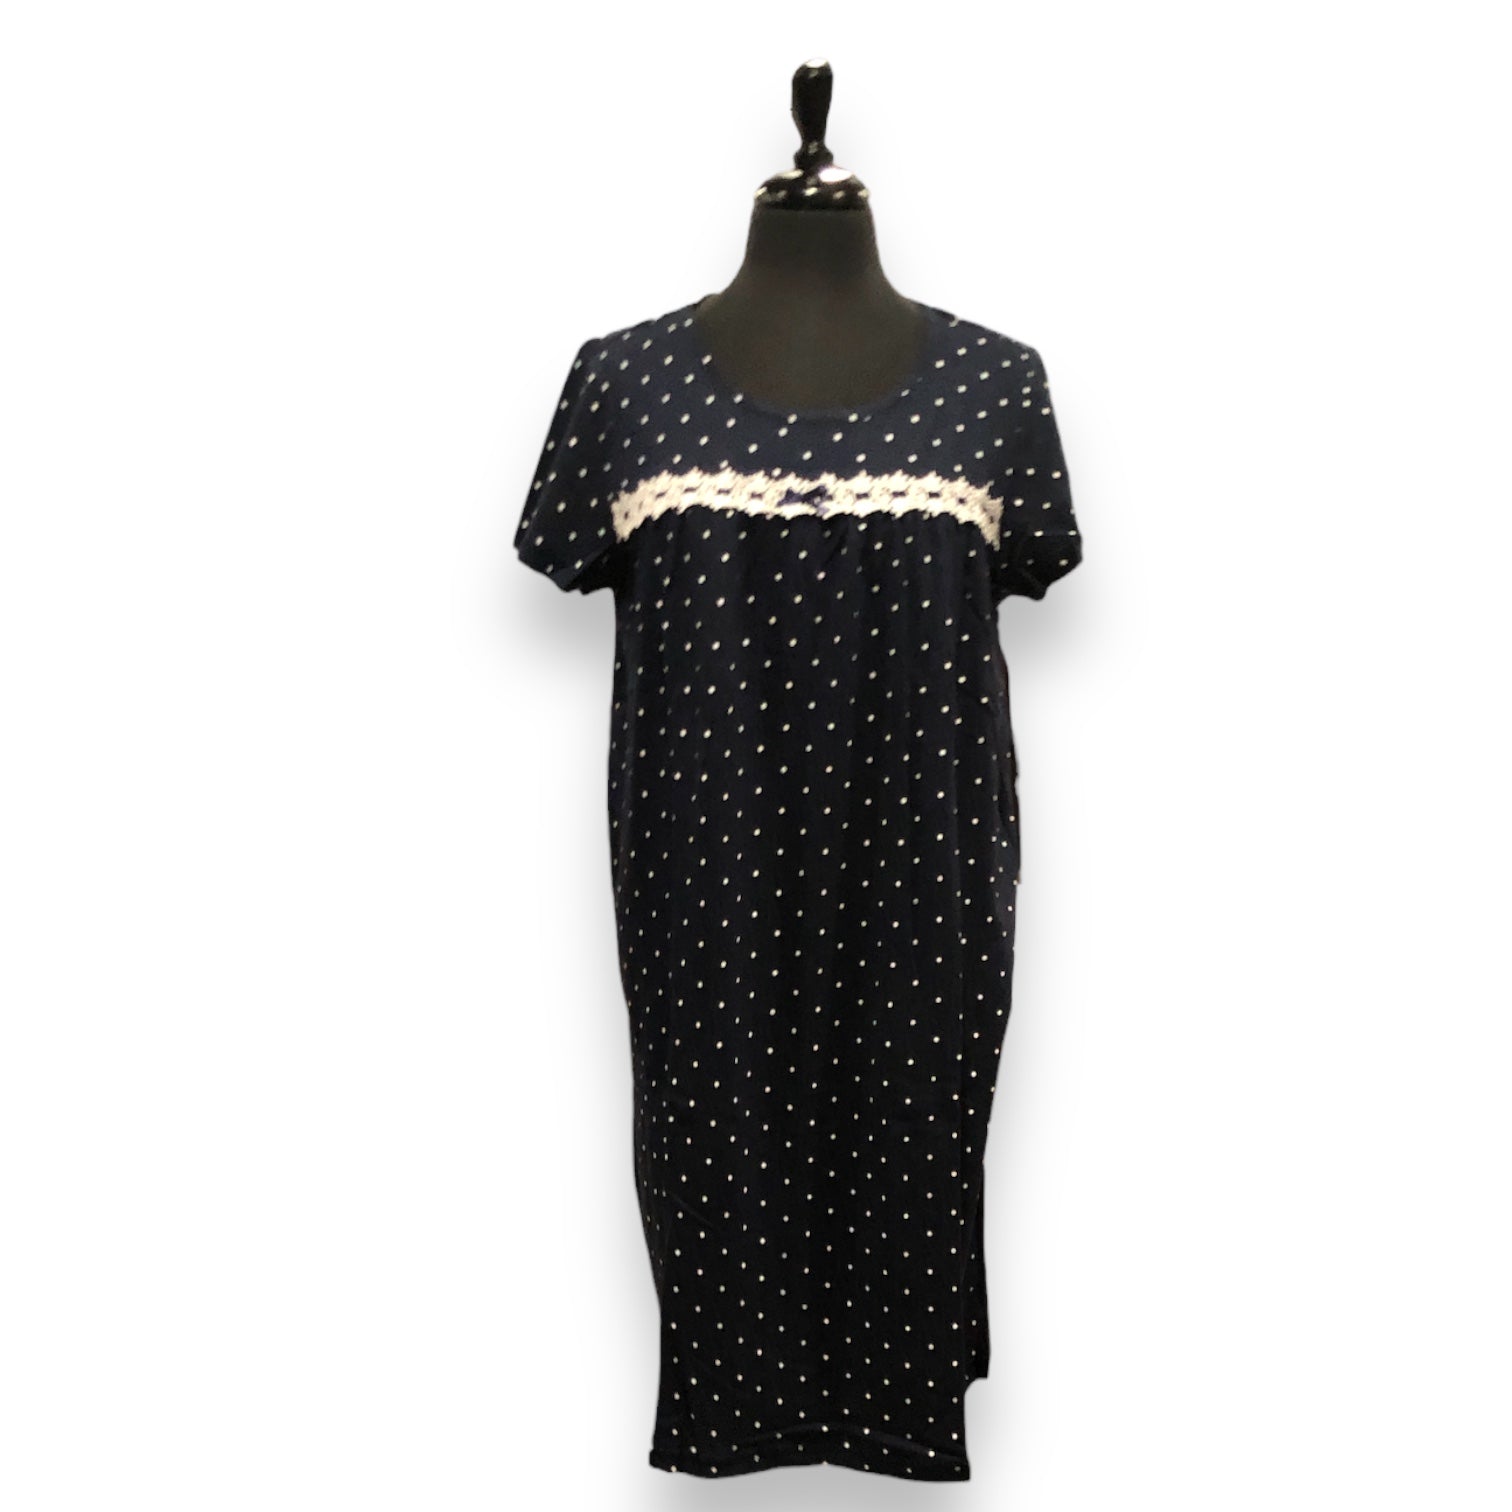 Women's Cotton Jersey Knit Nightgowns with Lace & Bow